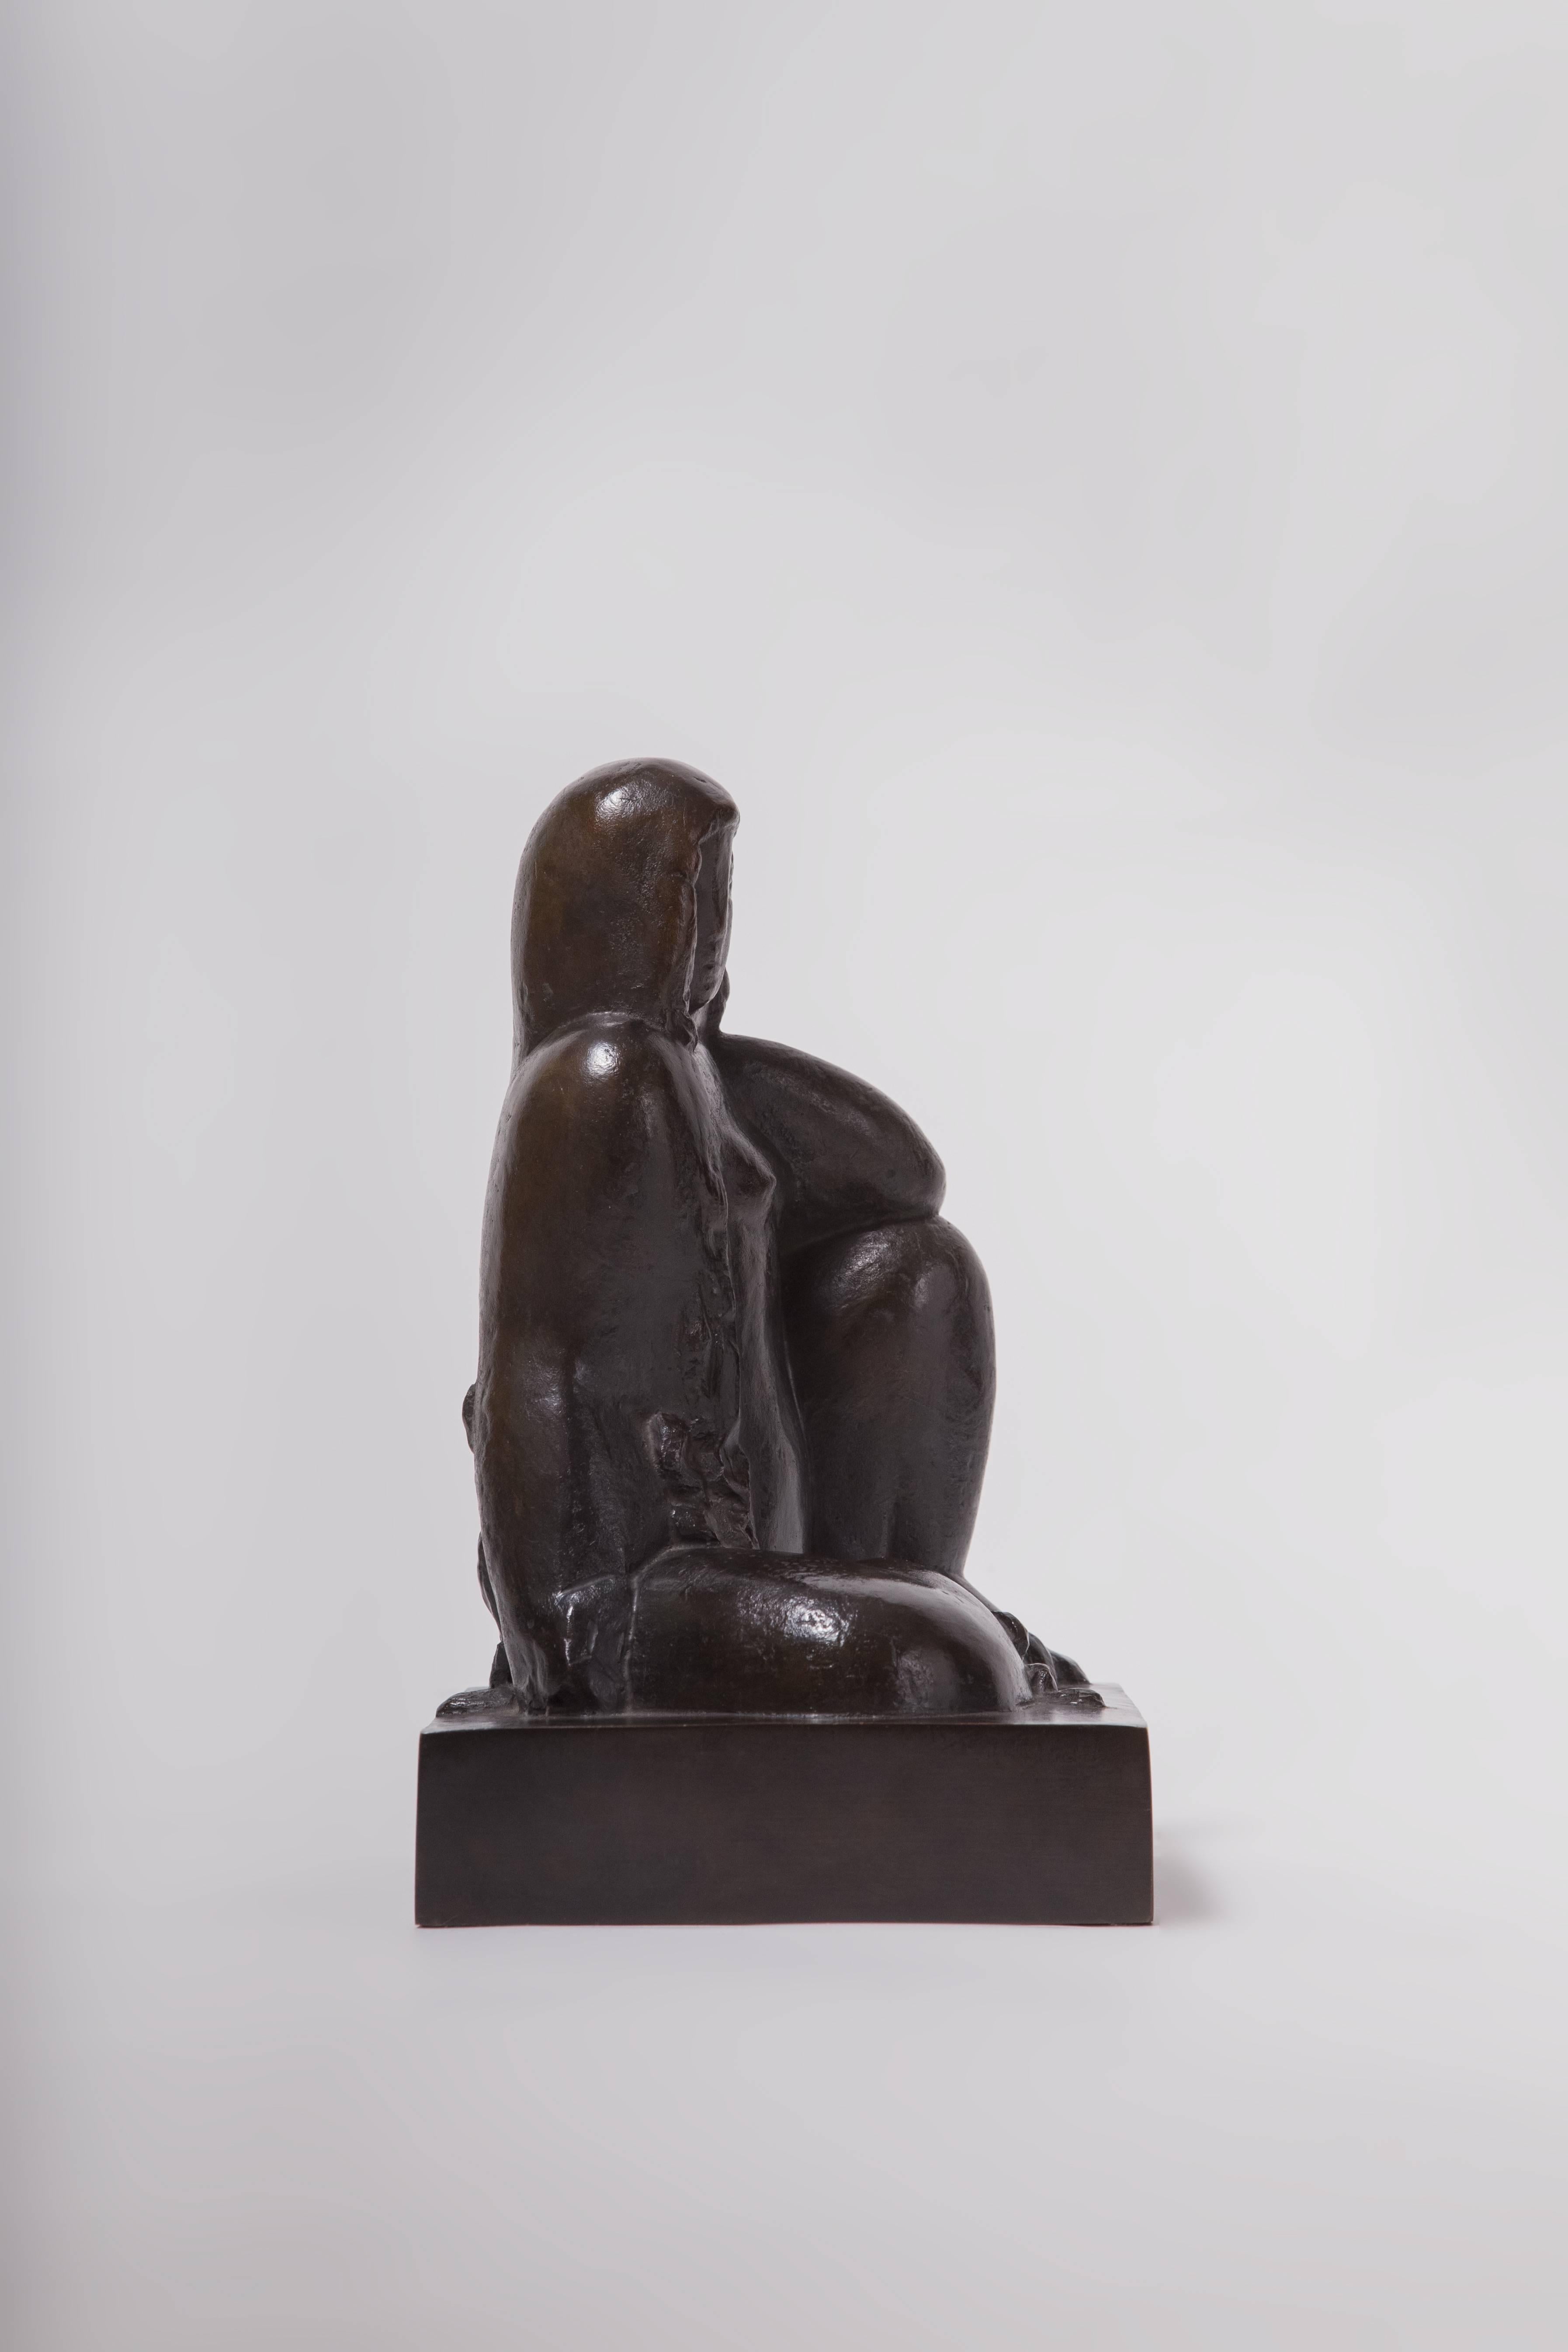 Art Deco Sculpture 'Nude Sitting' by Joseph Csaky, 1929 For Sale